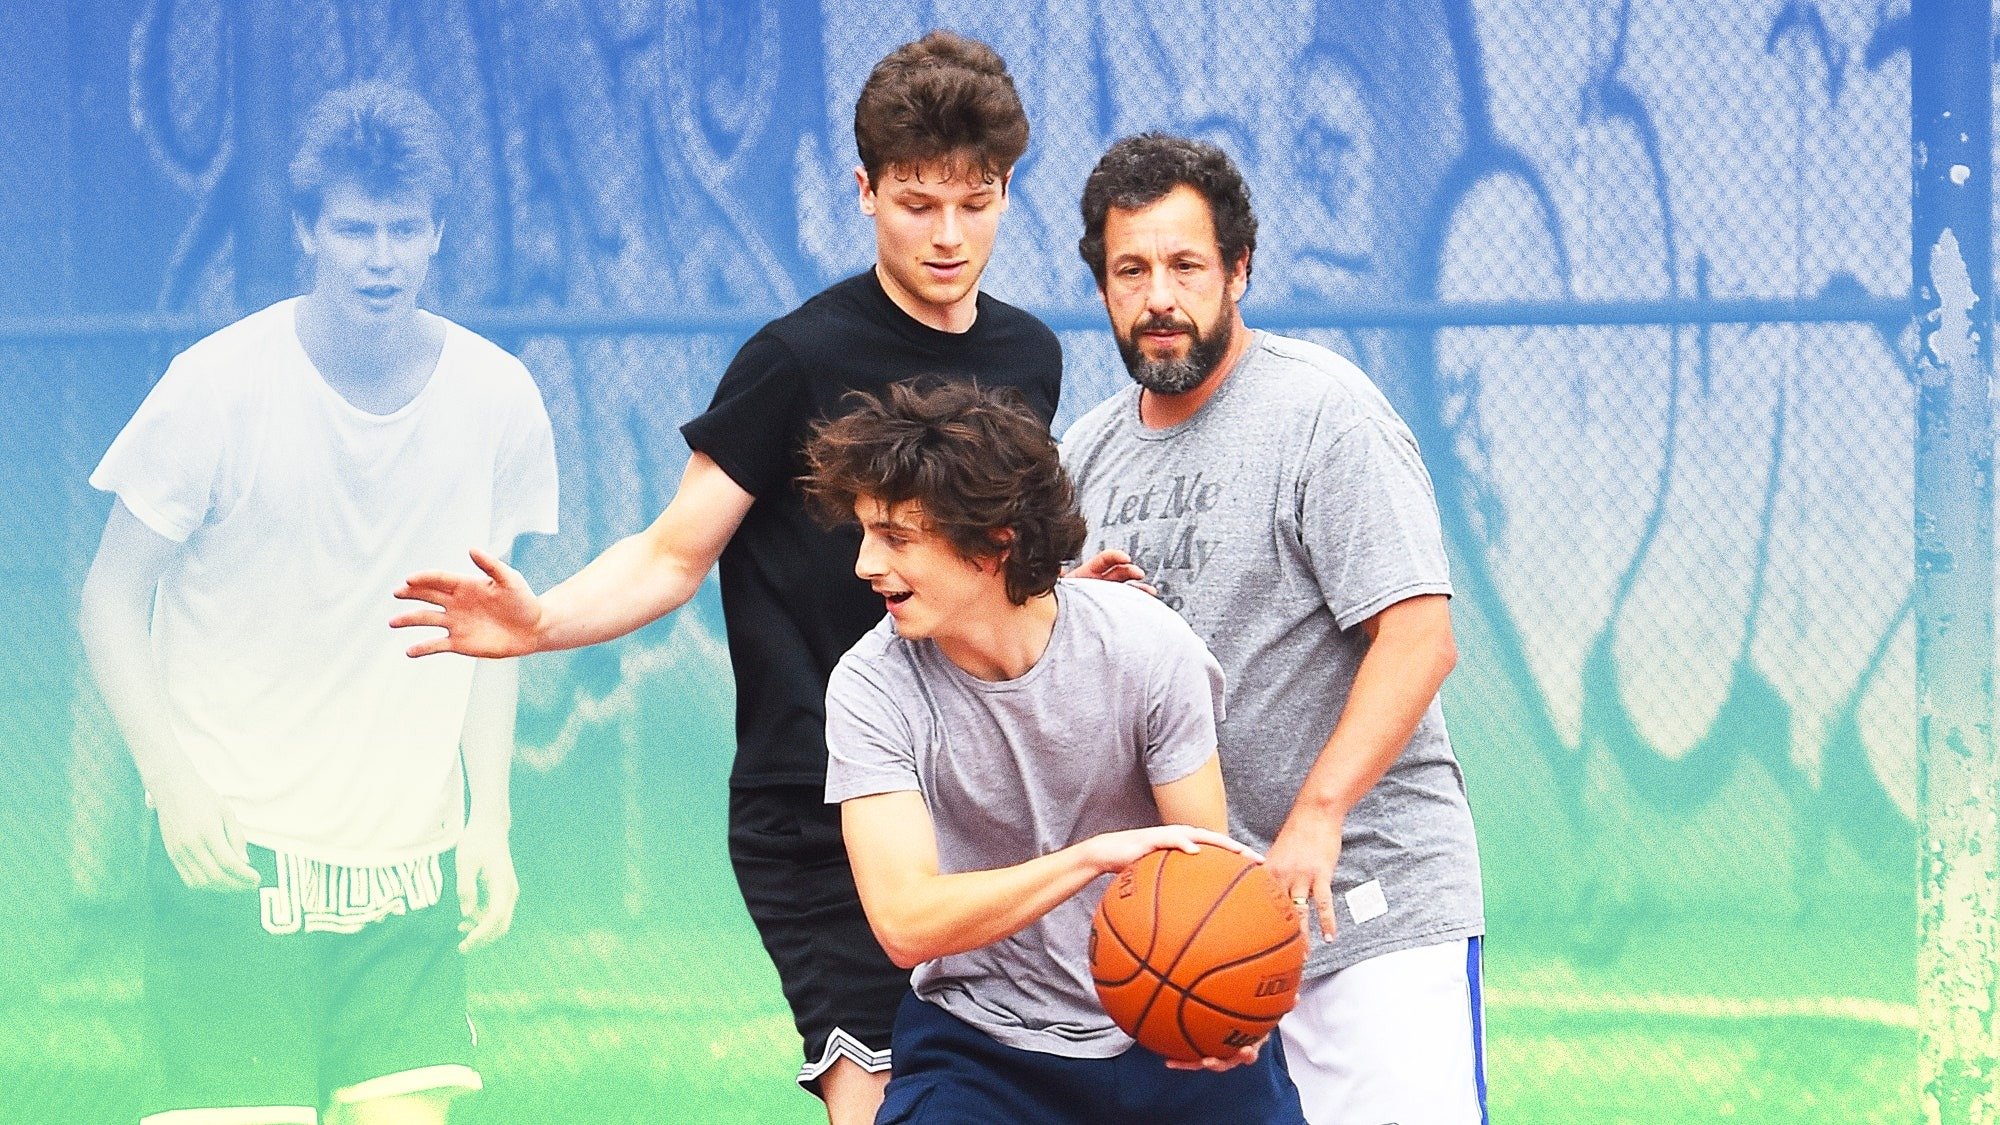 Meet the Guy Who Played Pickup Basketball With Adam Sandler and Timothée Chalamet